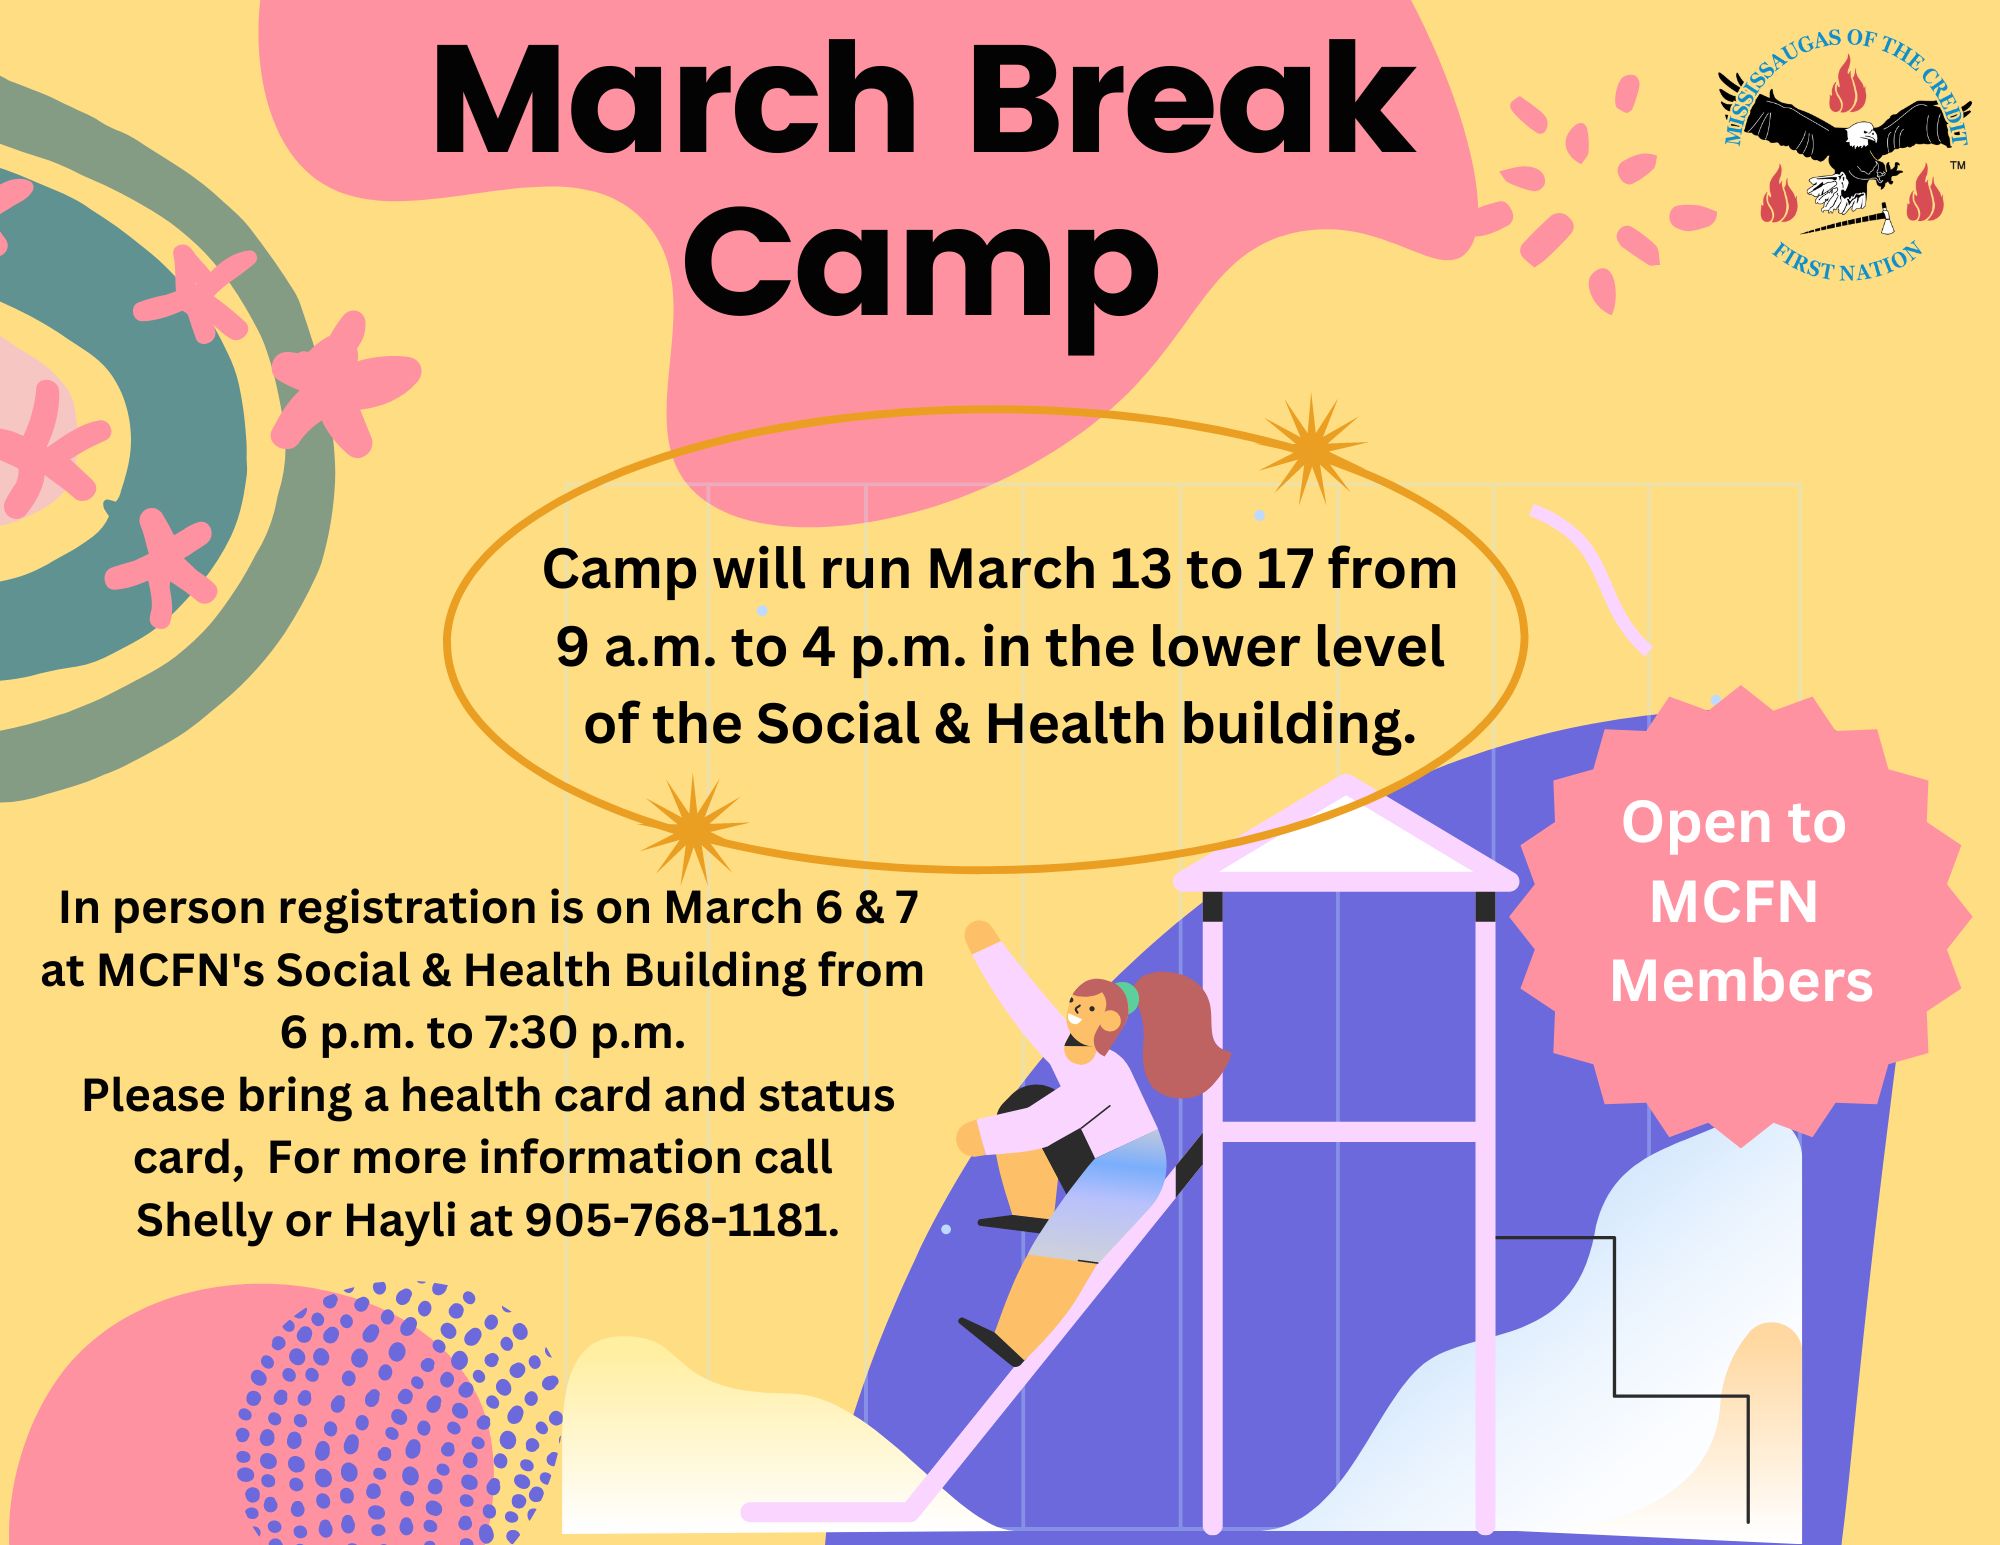 March Break camp at Social and Health